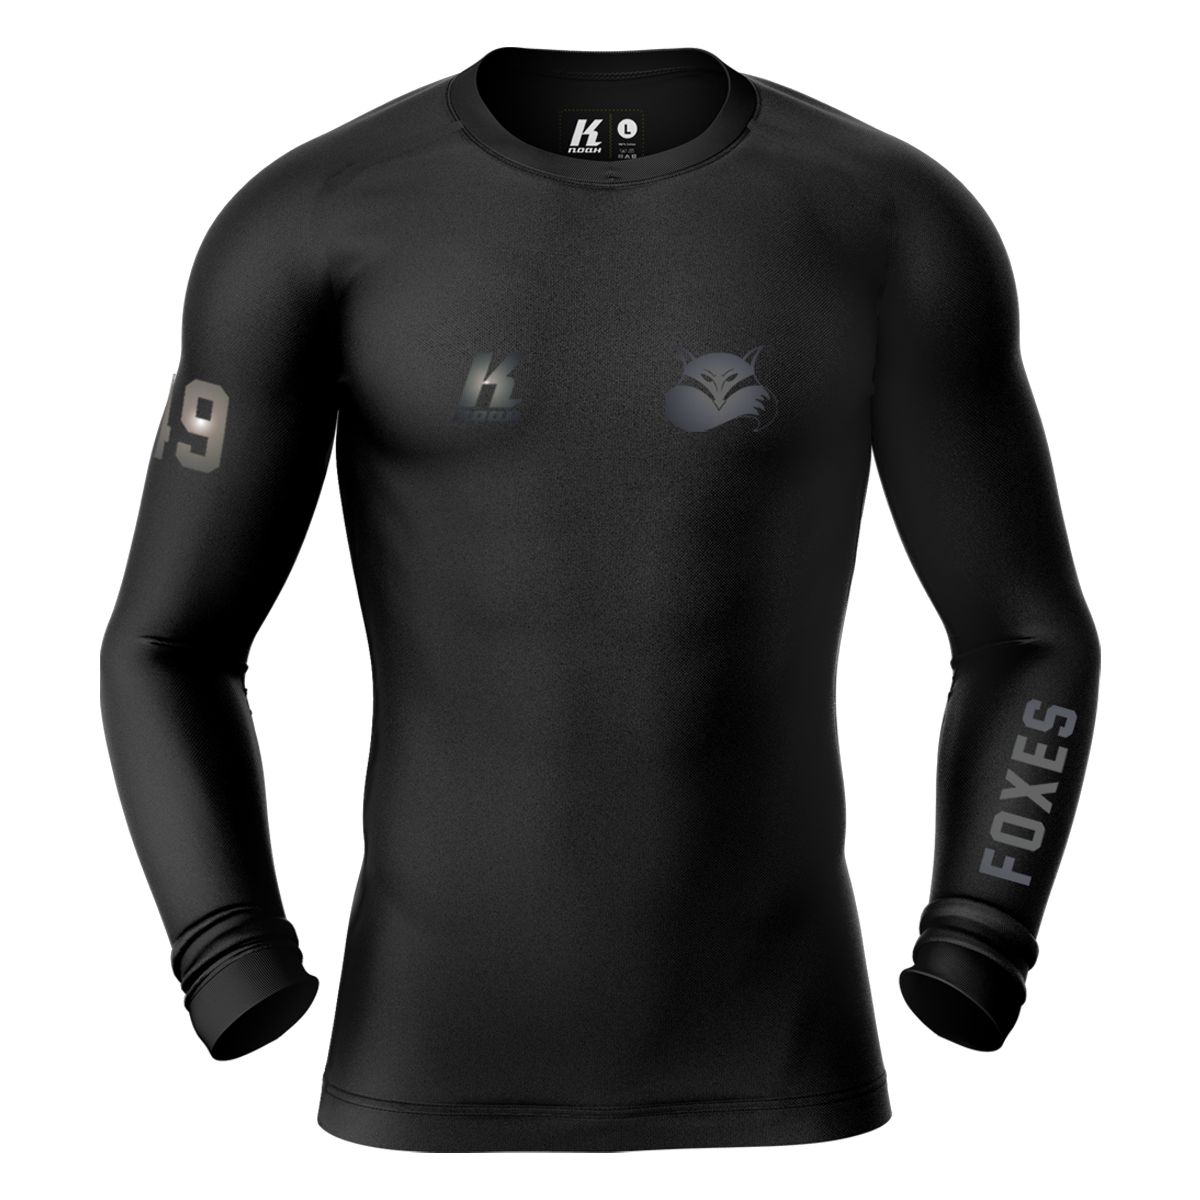 Foxes "Blackline" K.Tech Compression Longsleeve Shirt with Playernumber/Initials